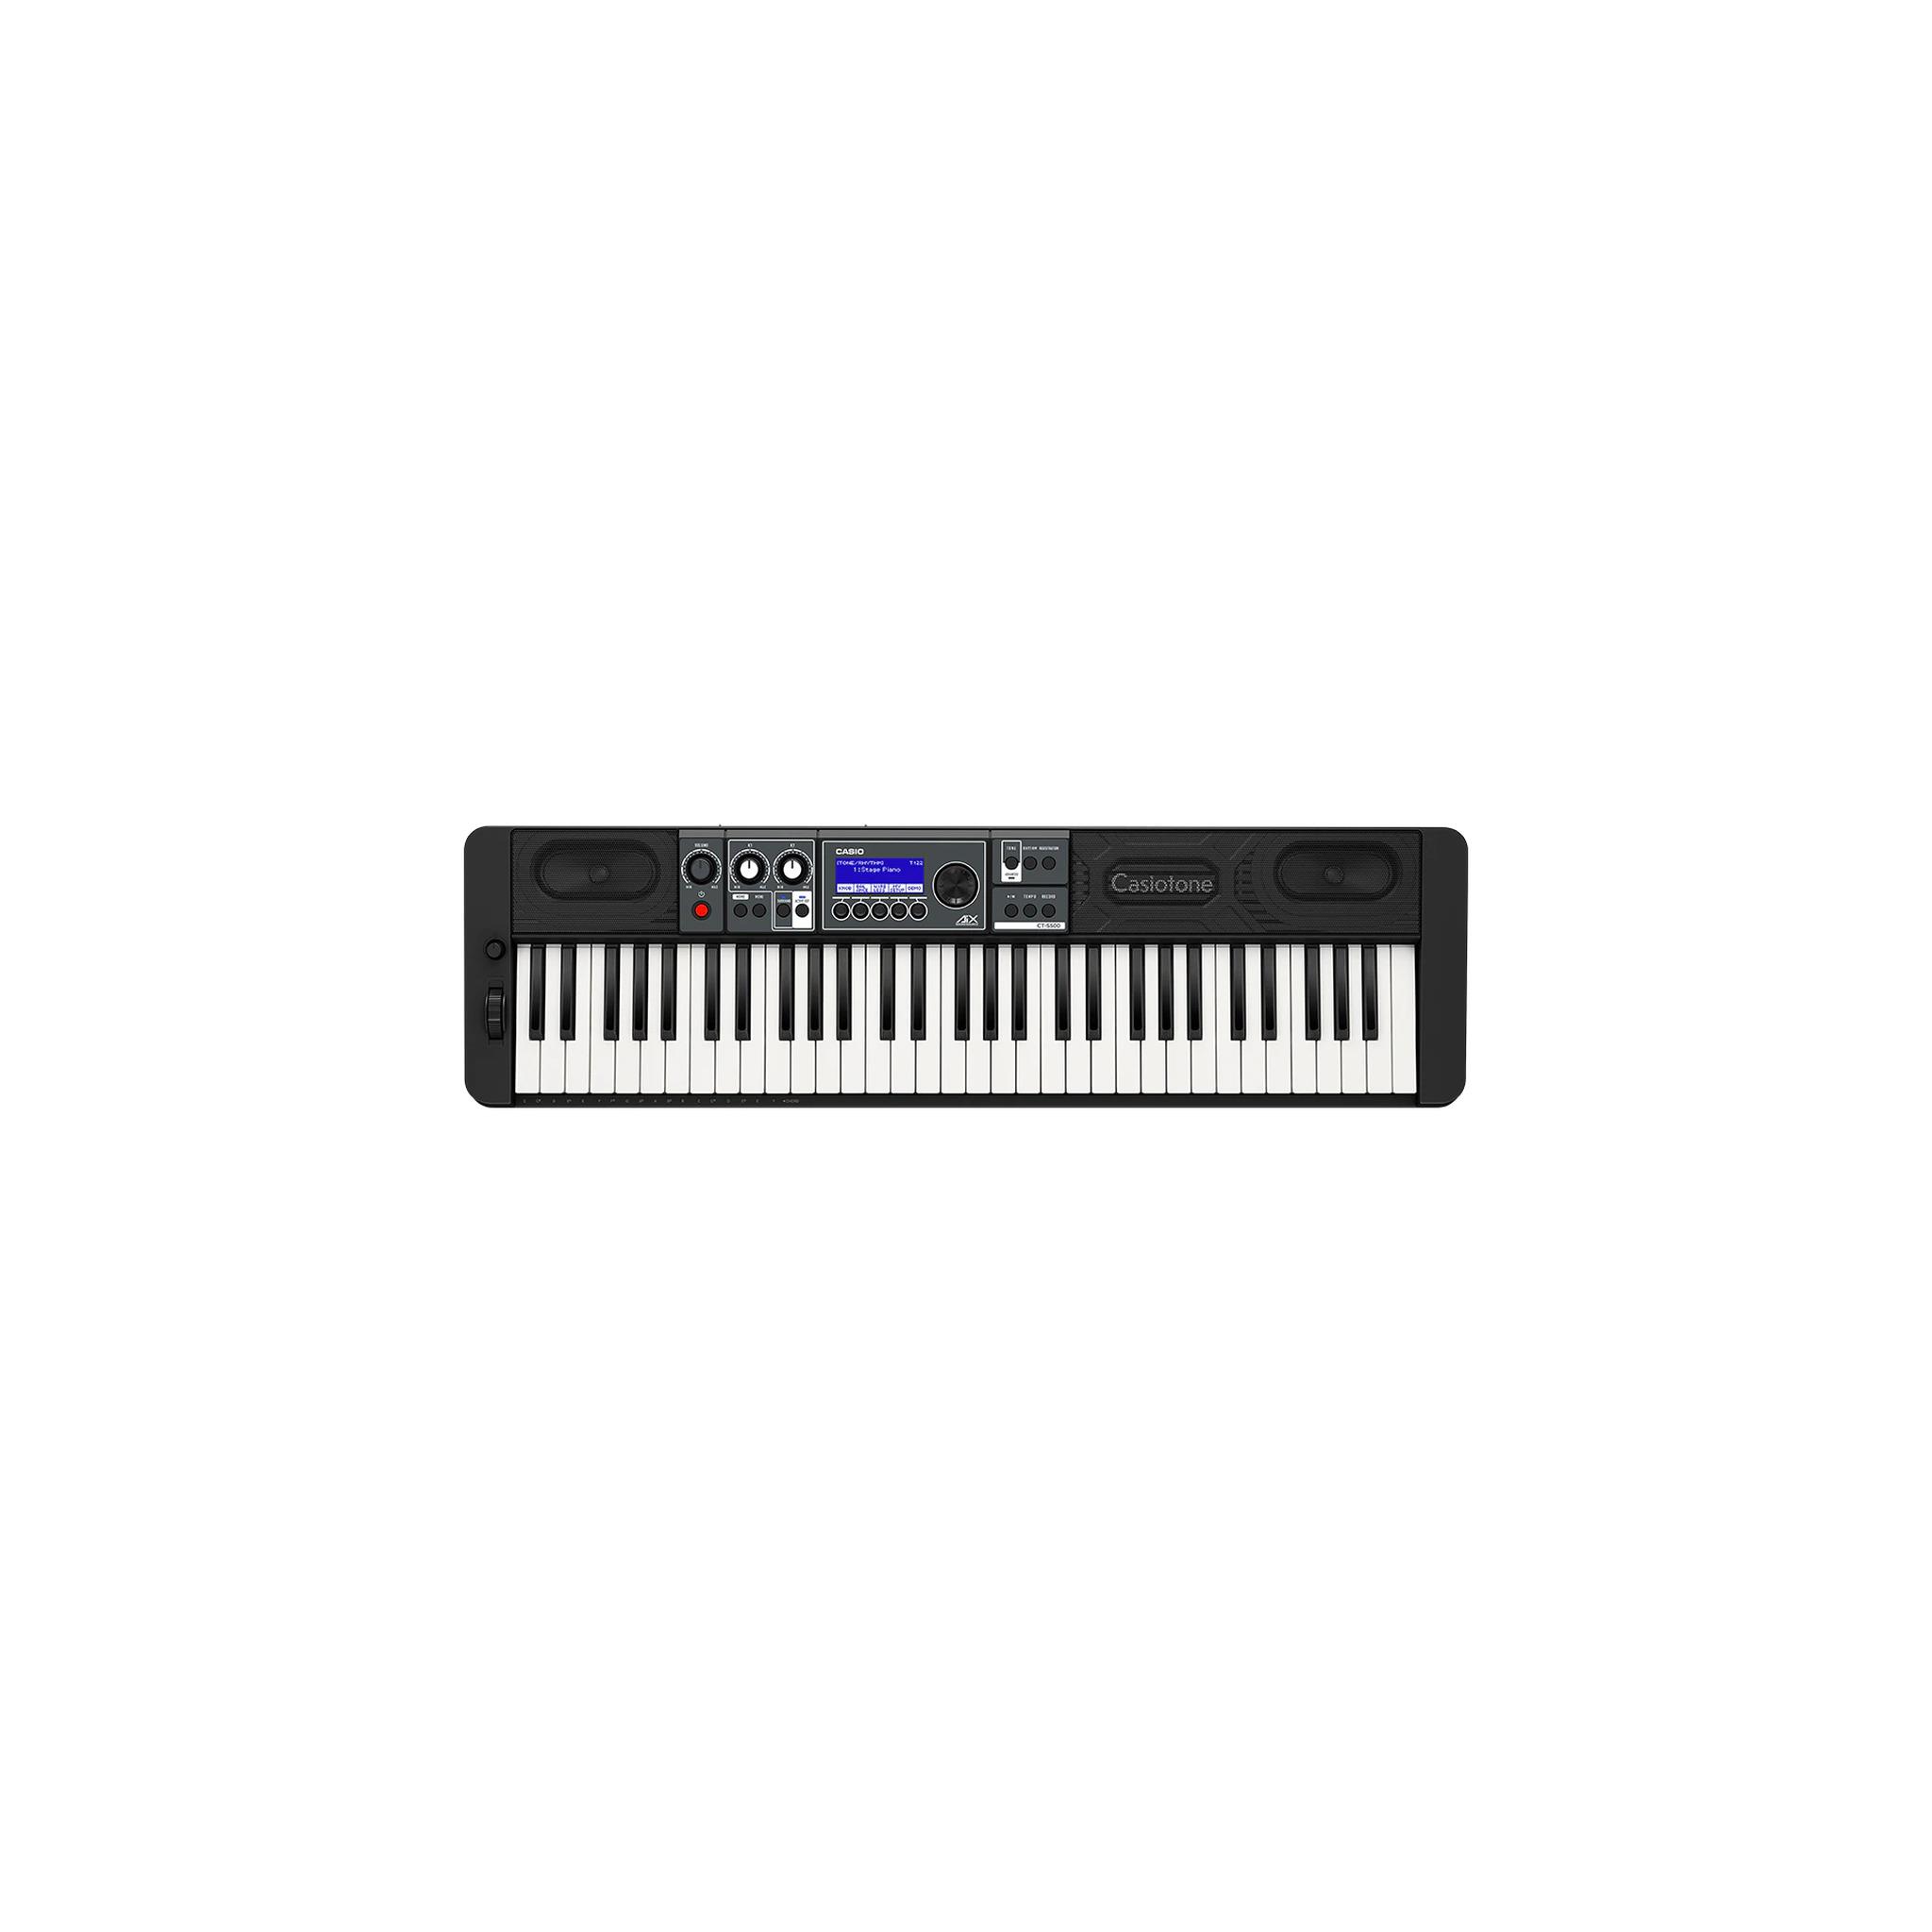 Casio CT-S500 61 Key Portable Keyboard Semi Weighted